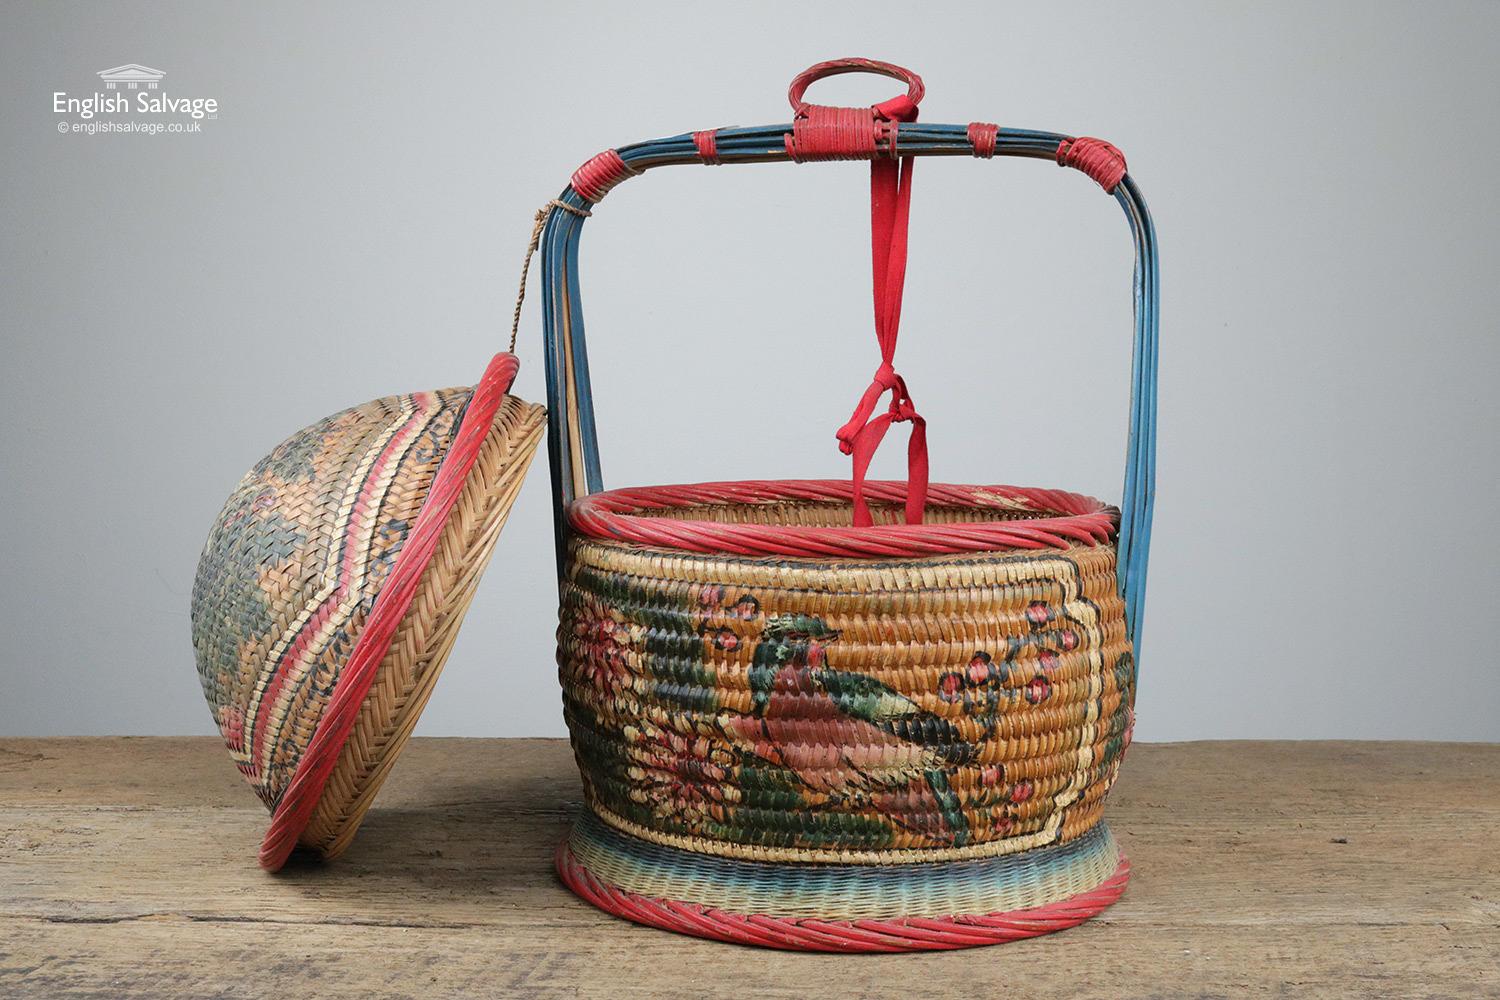 Original Chinese Woven Wicker Baskets, 20th Century In Good Condition For Sale In London, GB